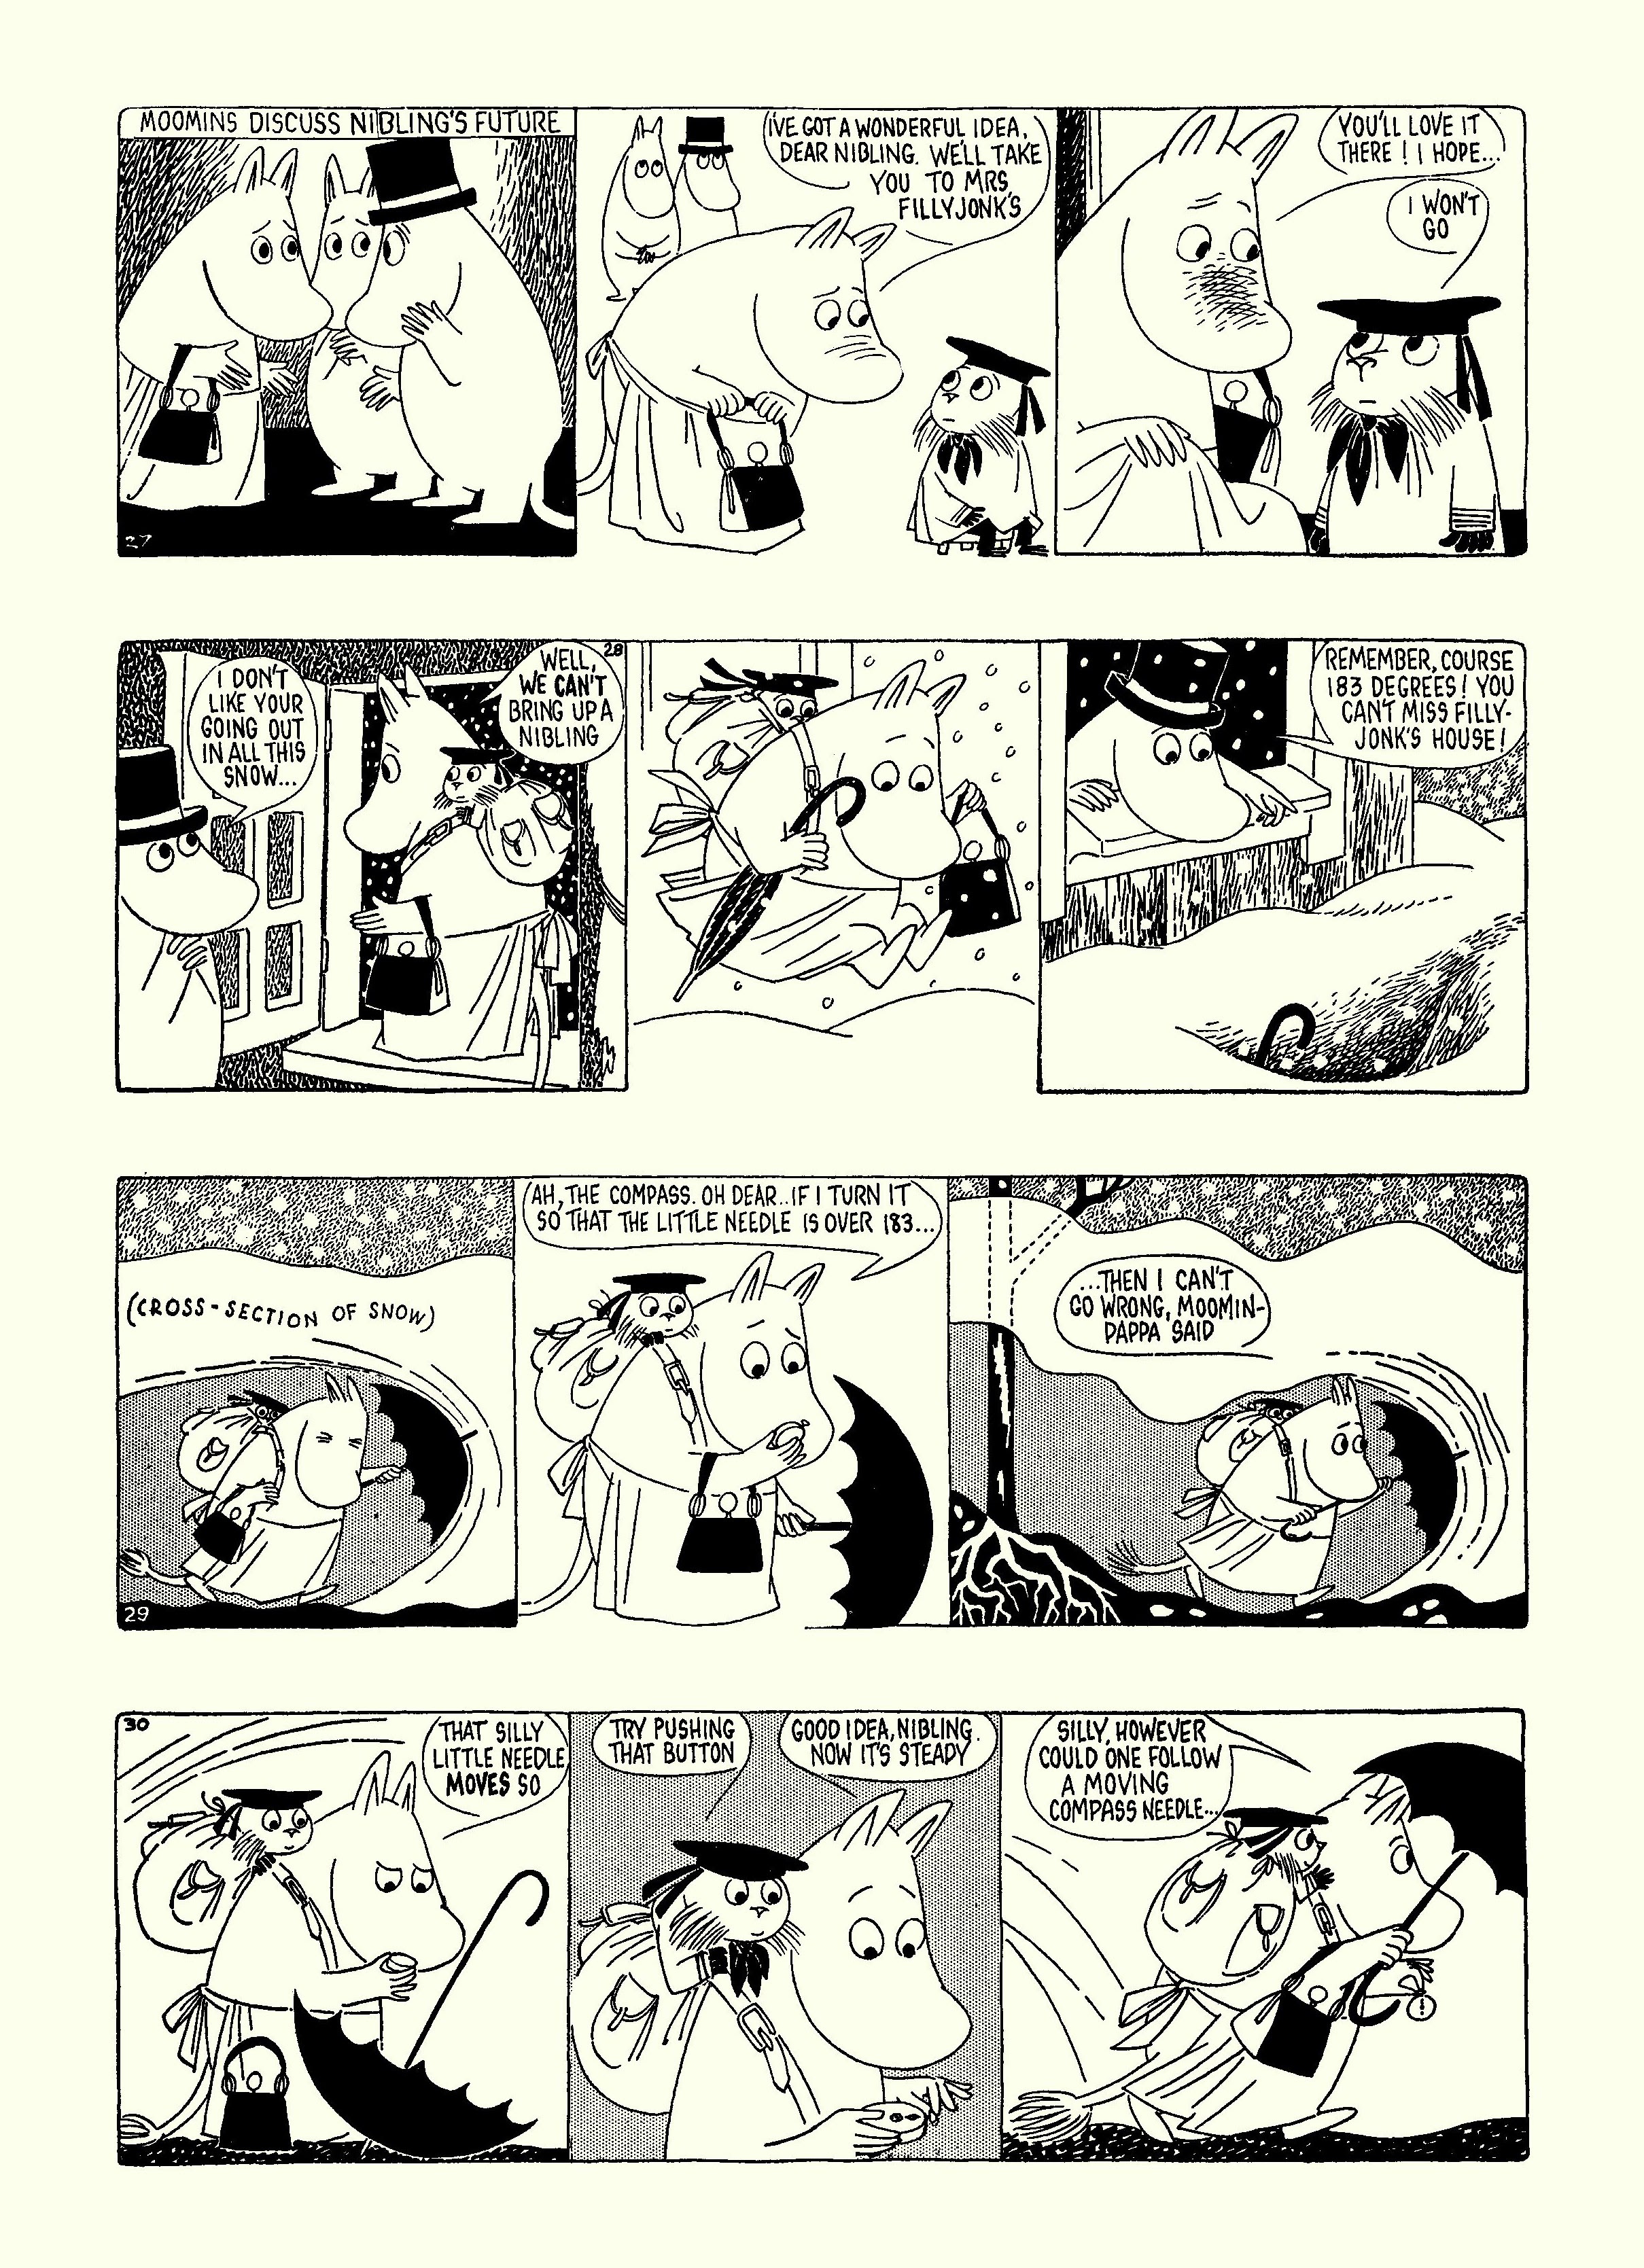 Read online Moomin: The Complete Tove Jansson Comic Strip comic -  Issue # TPB 5 - 13